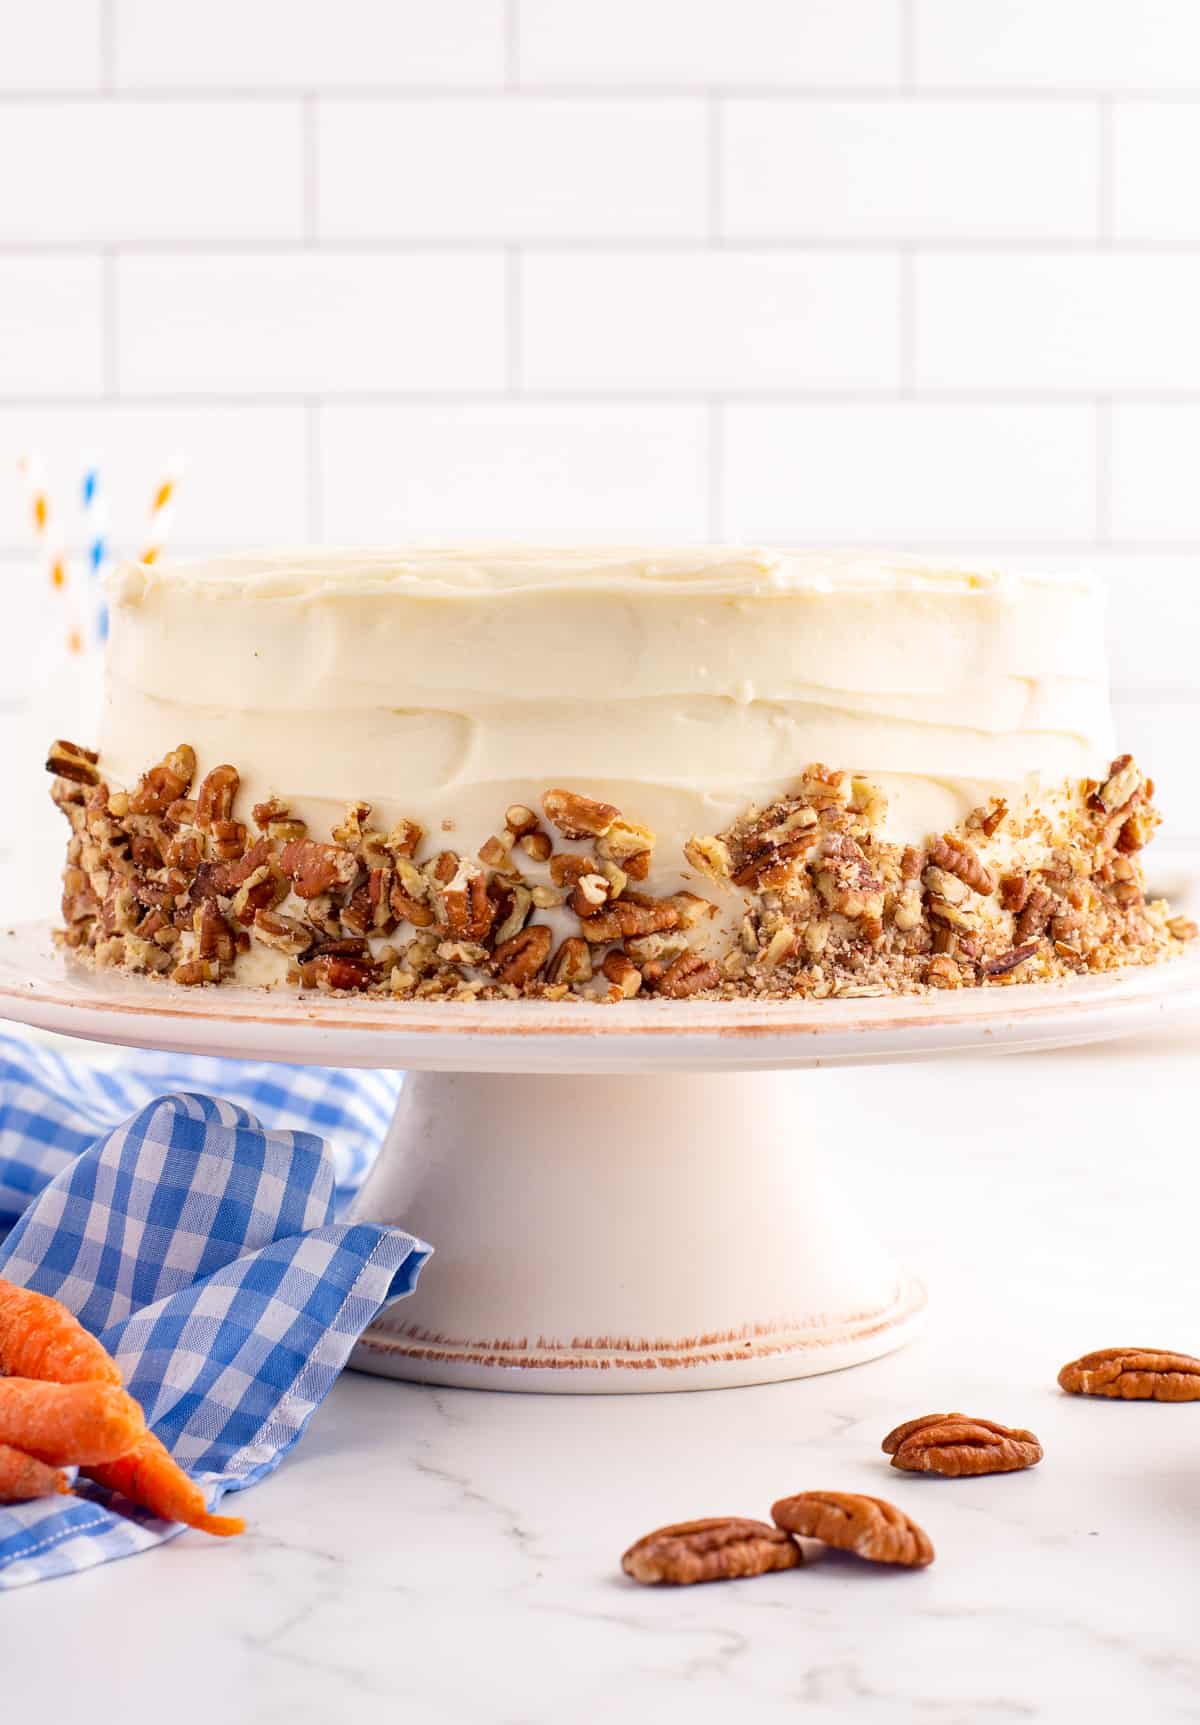 Finished Carrot Cake Recipe on white cake stand decorated with chopped nuts with nuts on the countertop beside cake stand.